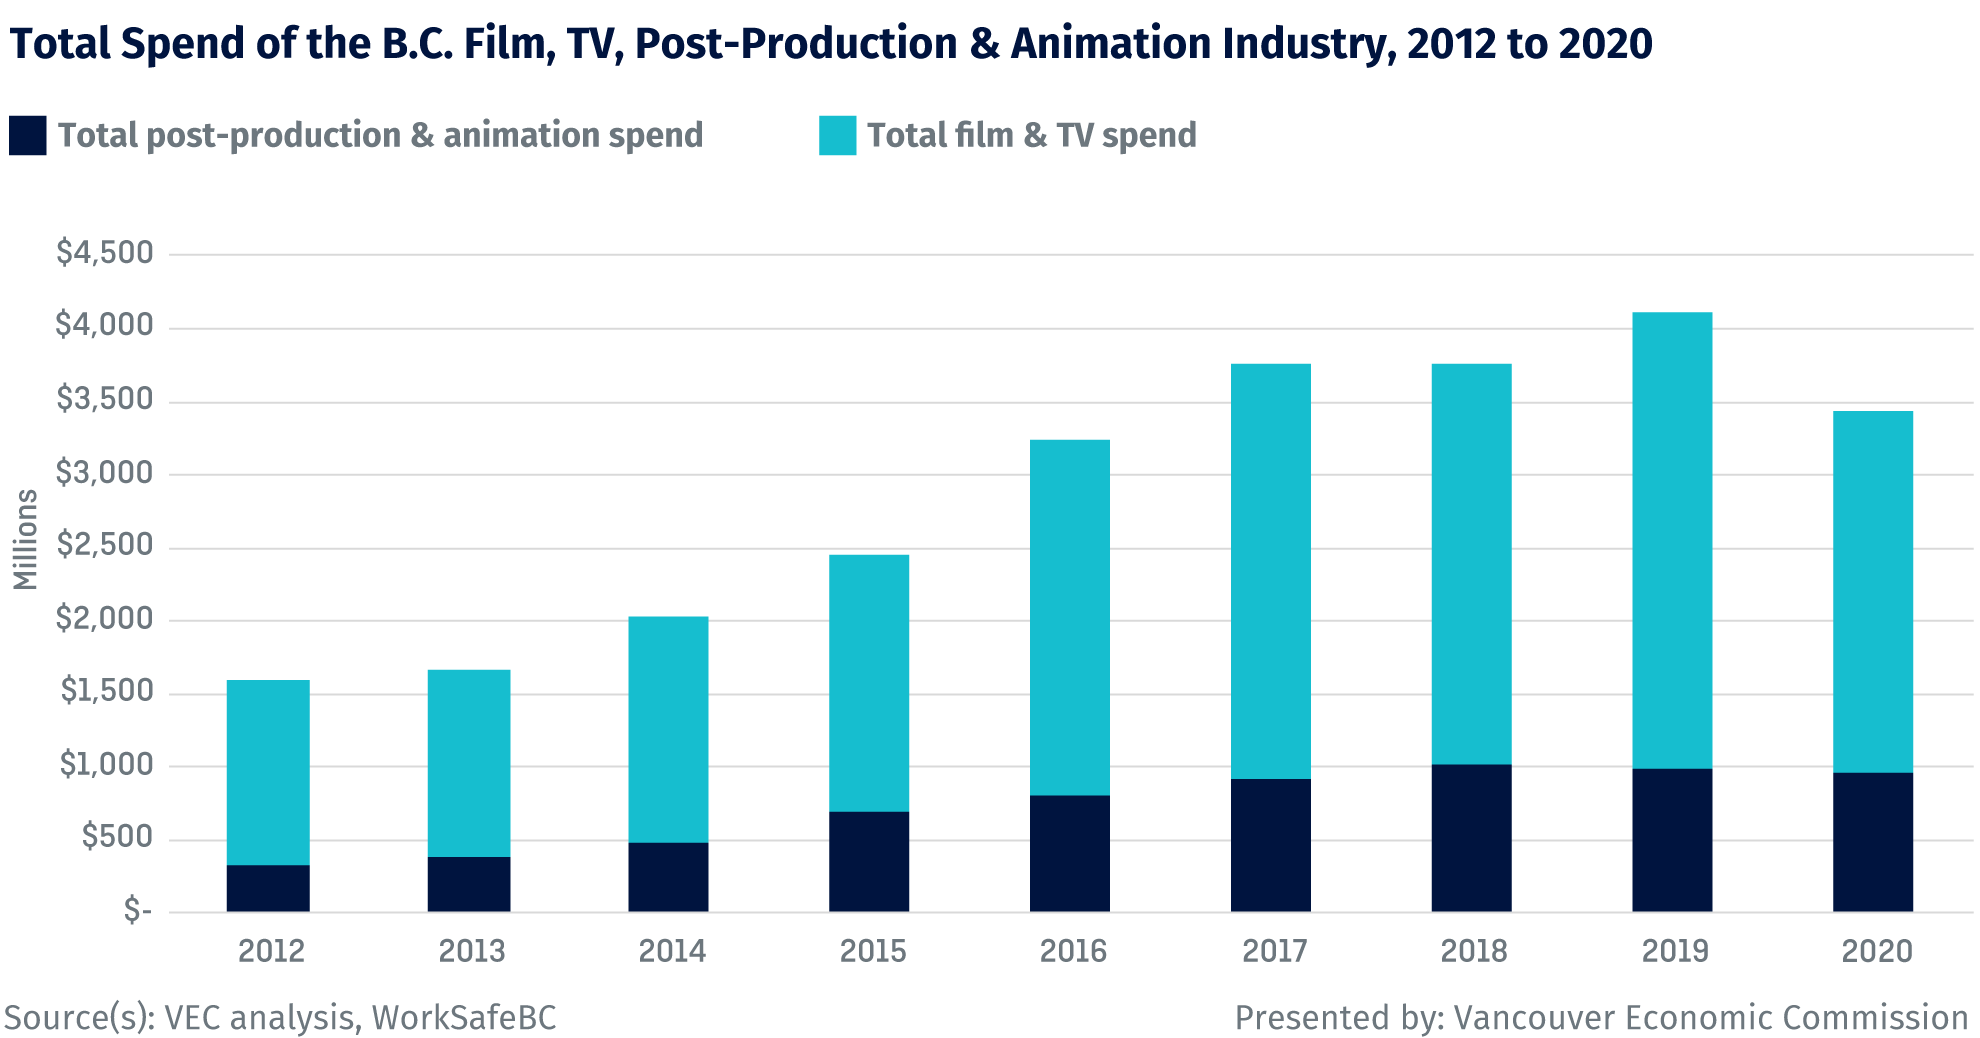 Total Spend of the B.C. Film, TV, Post-Production & Animation Industry, 2012 to 2020 | Vancouver Economic Commission